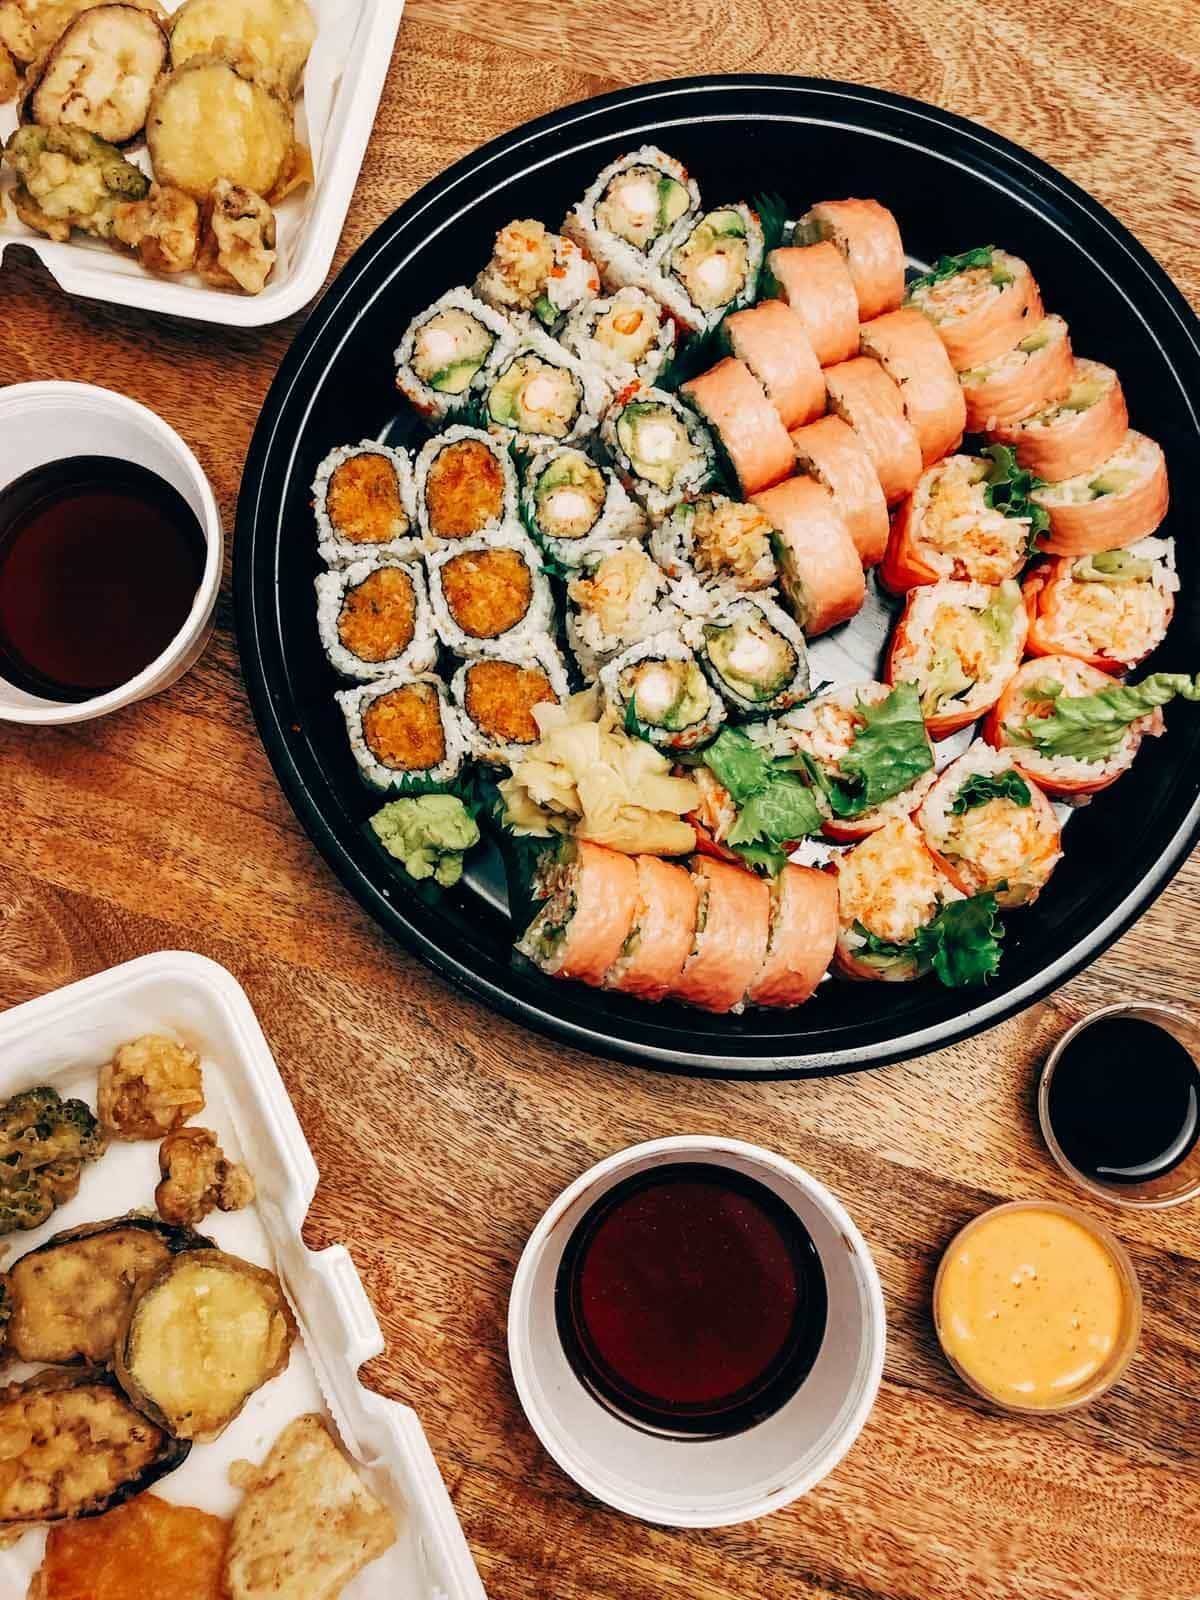 A wooden table is filled with large plate of sushi with sauces and drinks.